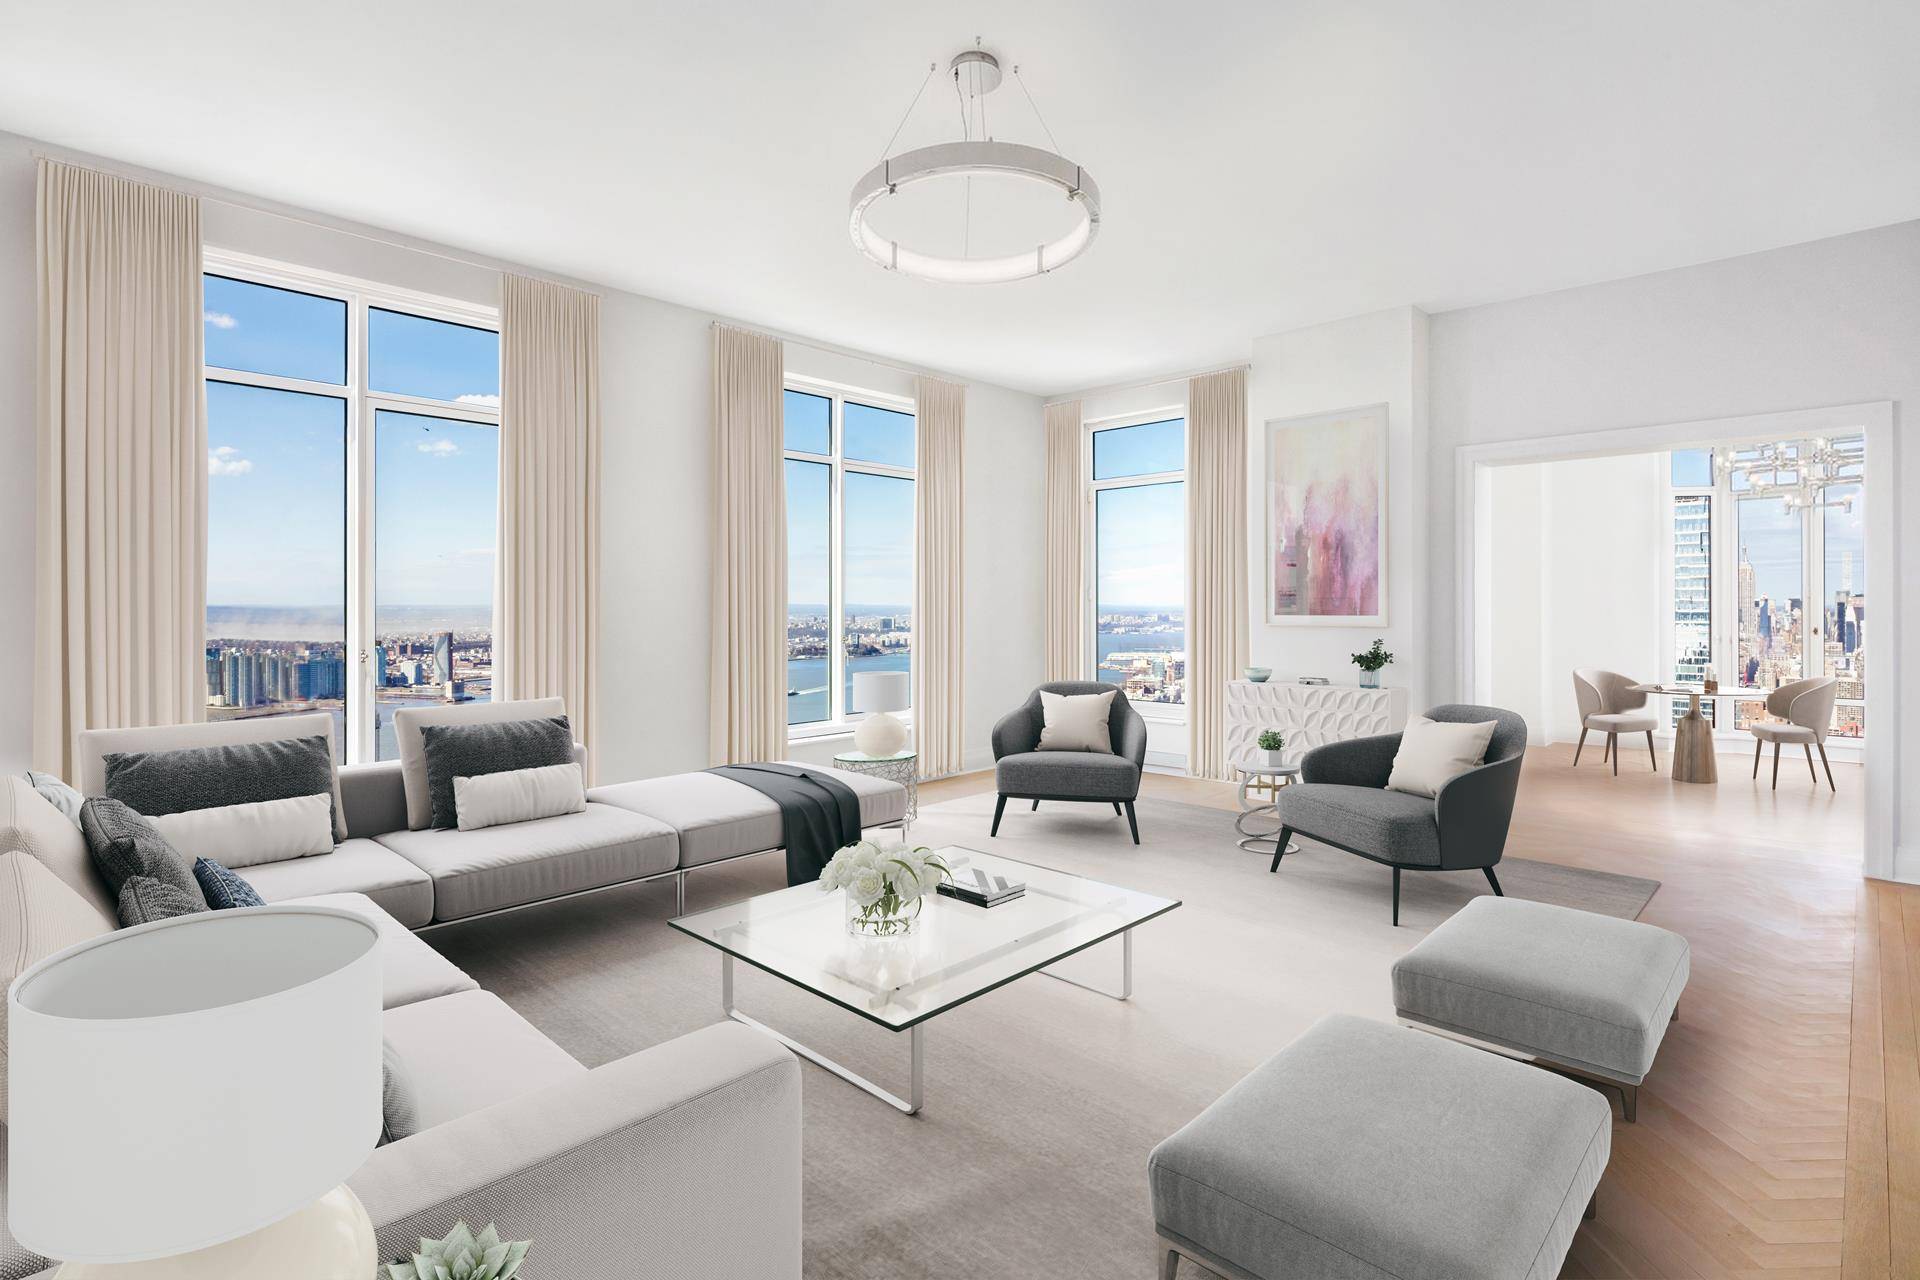 We present to you 30 Park Place, the Four Seasons 5 Star residences in downtown Manhattan.